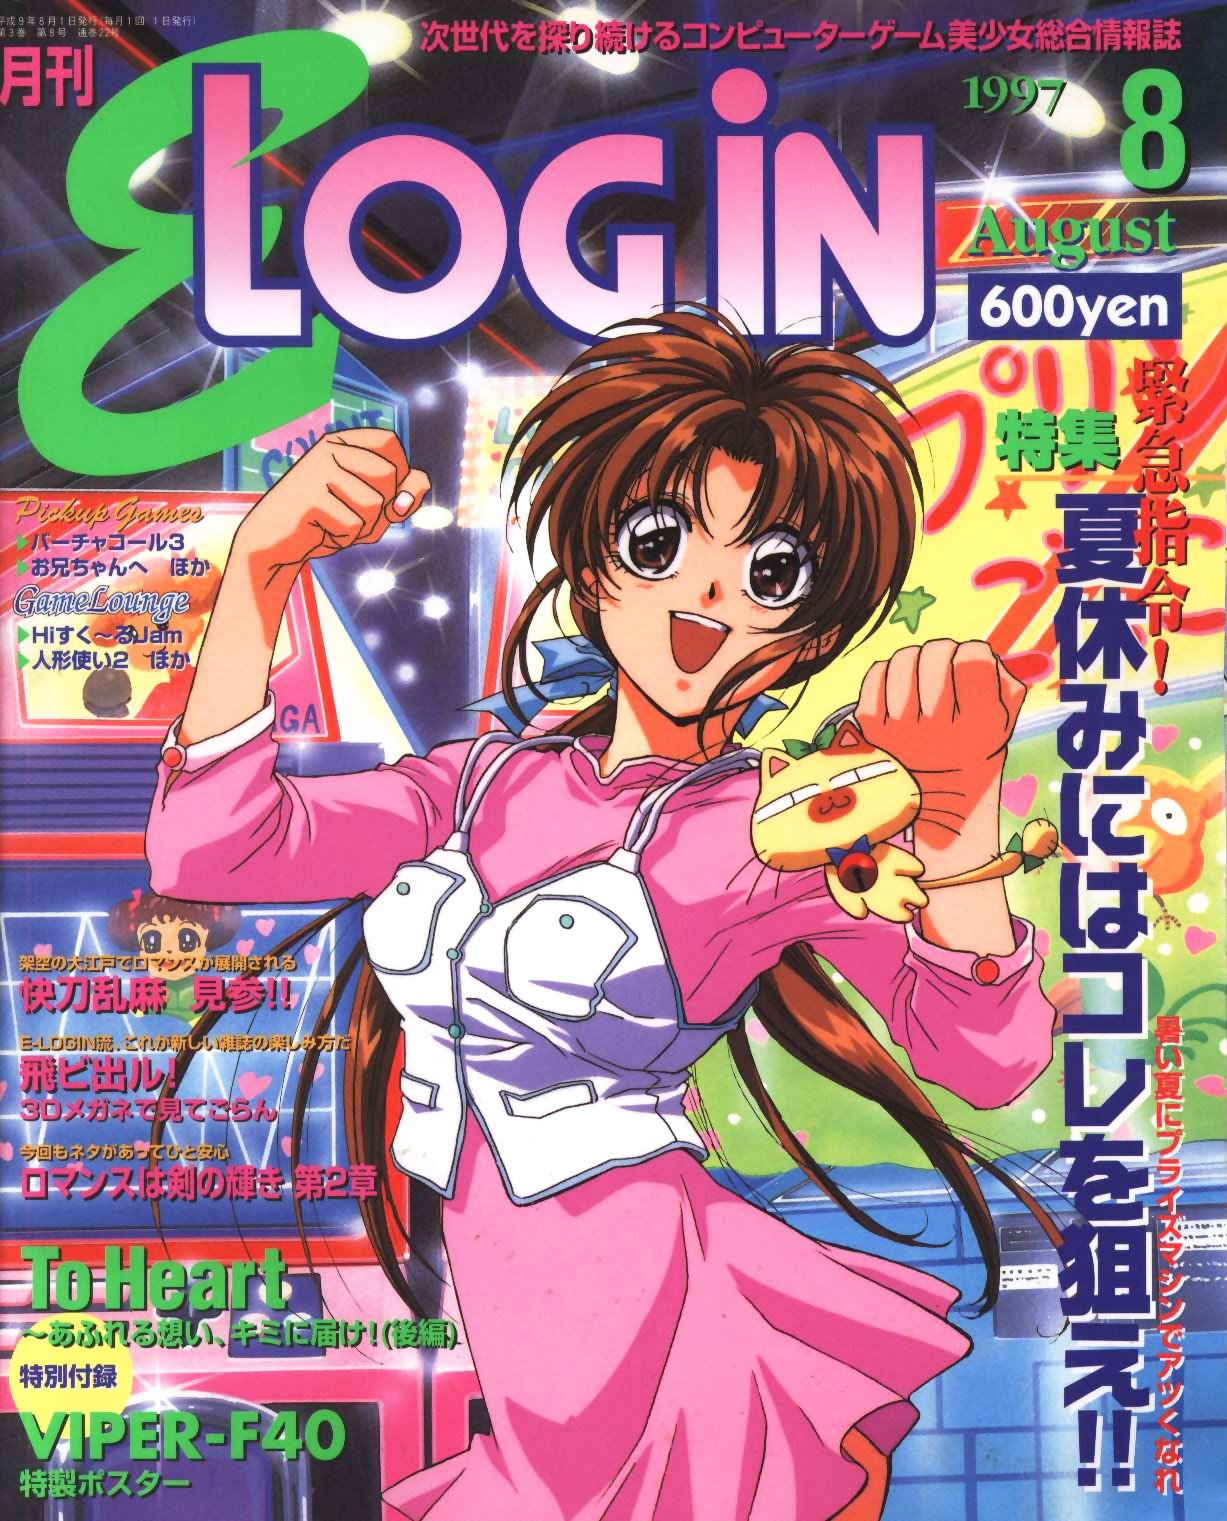 E-Login Issue 022 (August 1997)